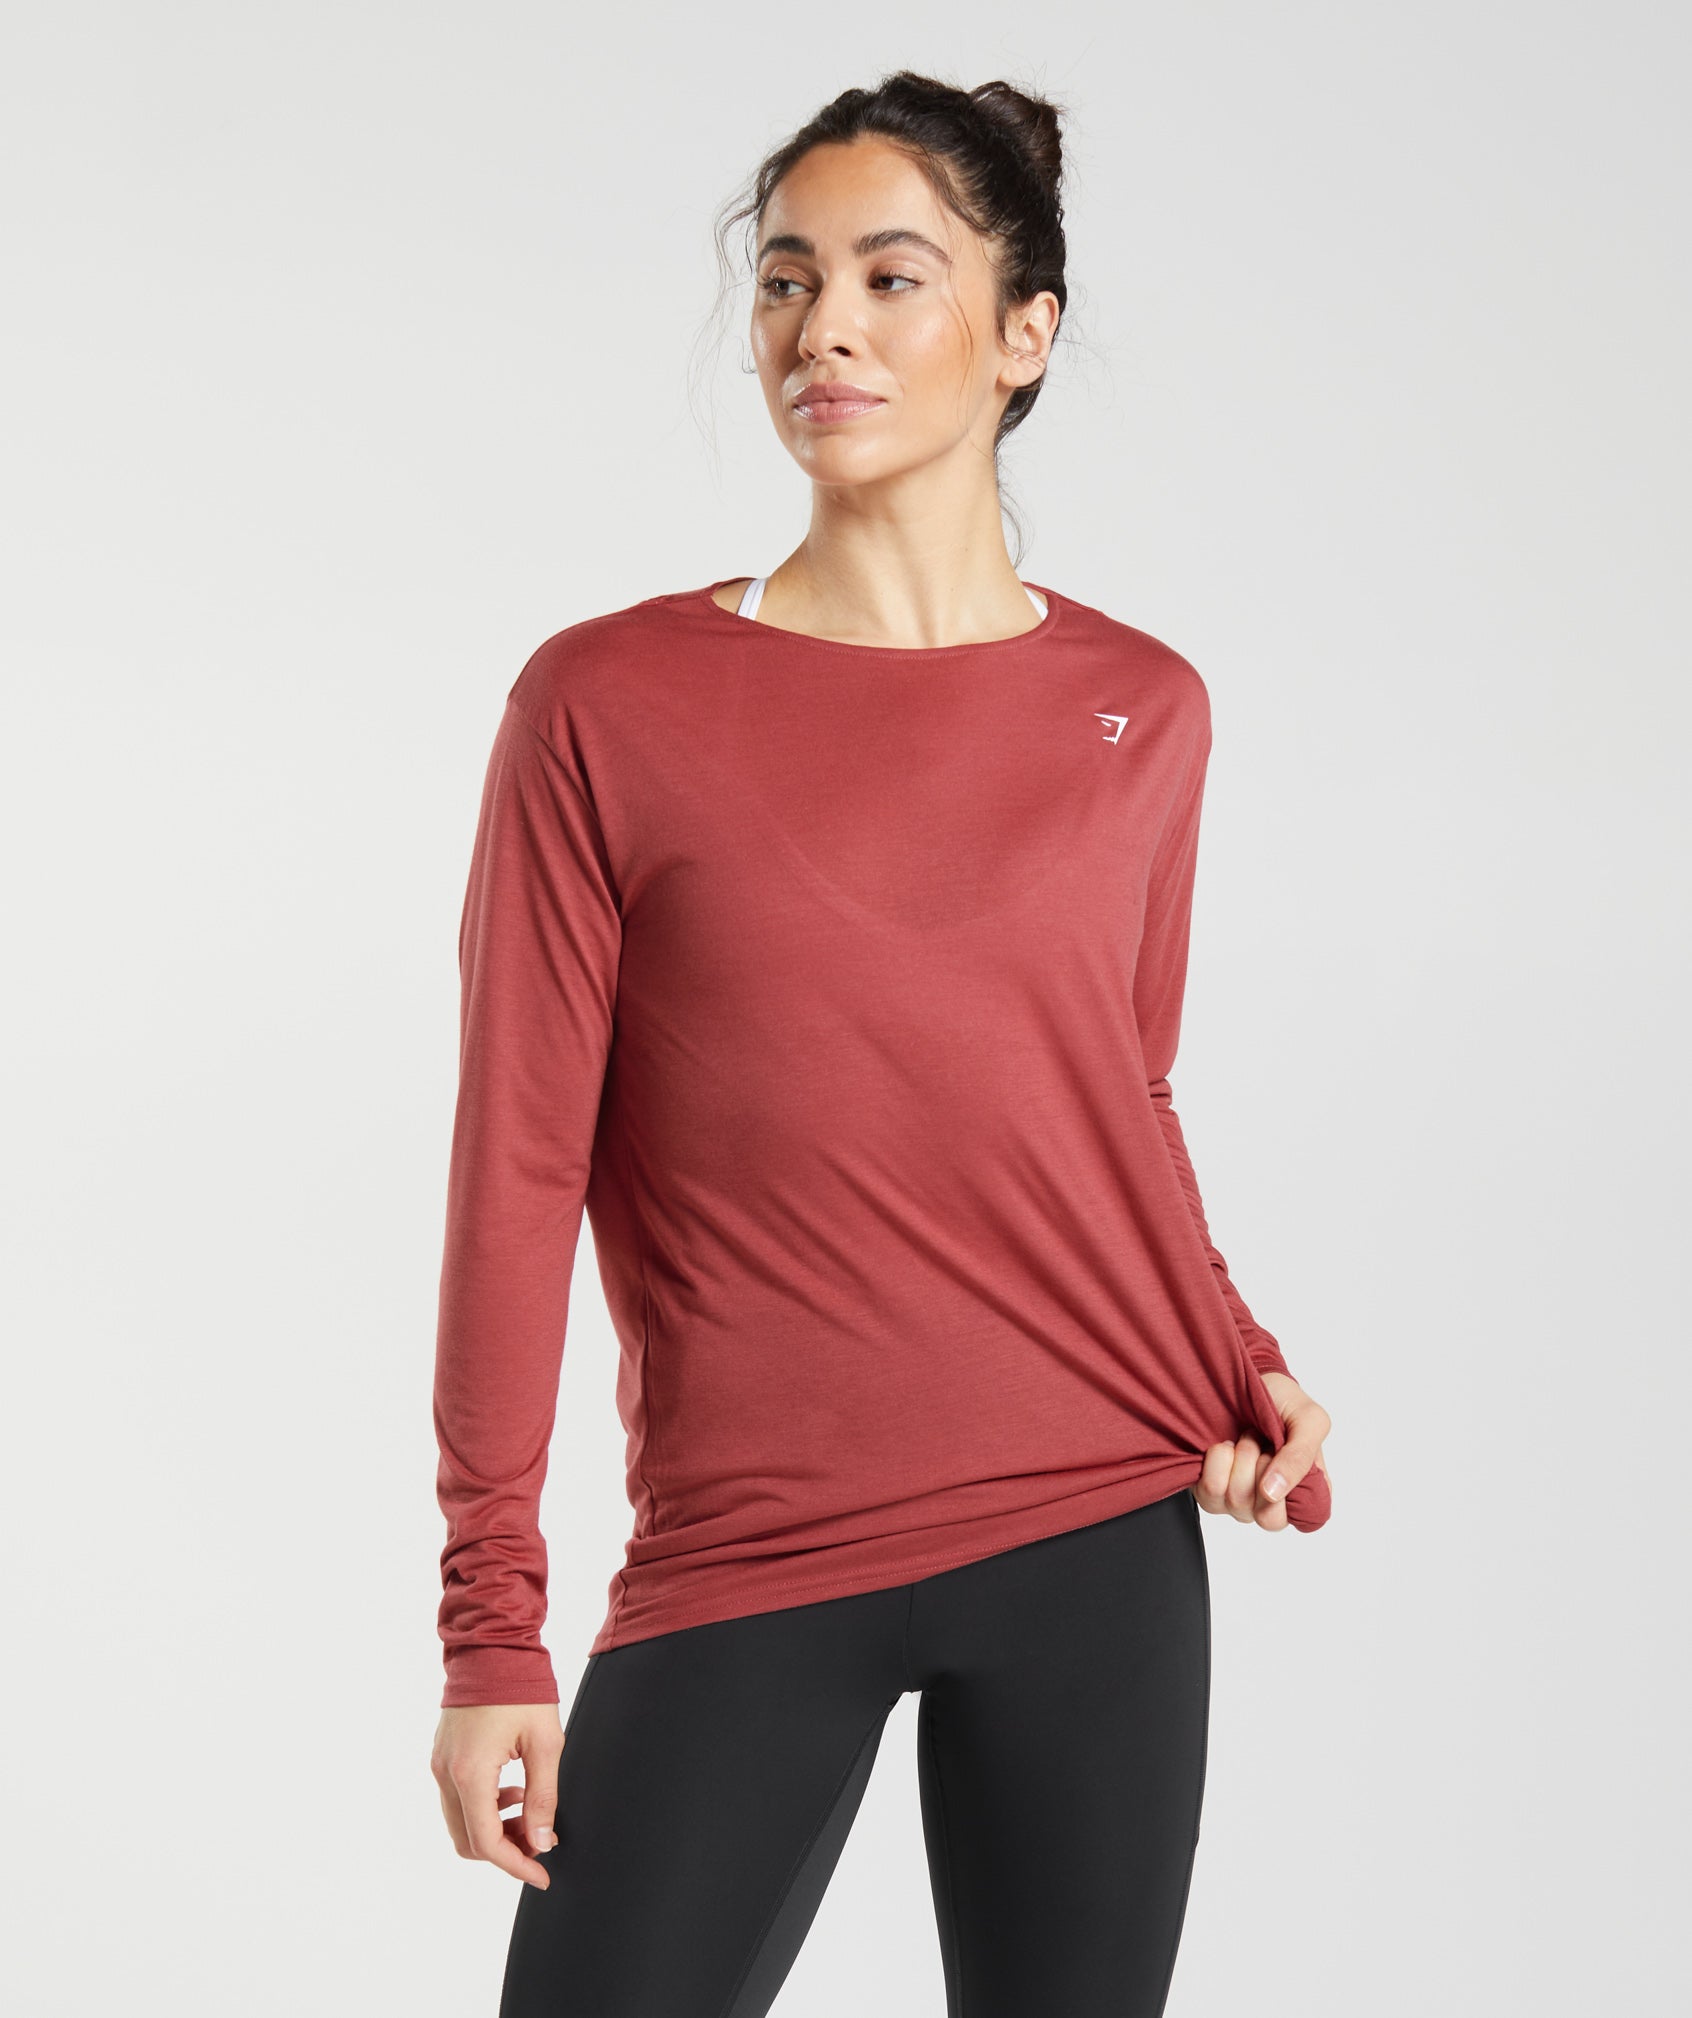 Super Soft Cut-Out Long Sleeve Top in Pomegranate Red - view 1